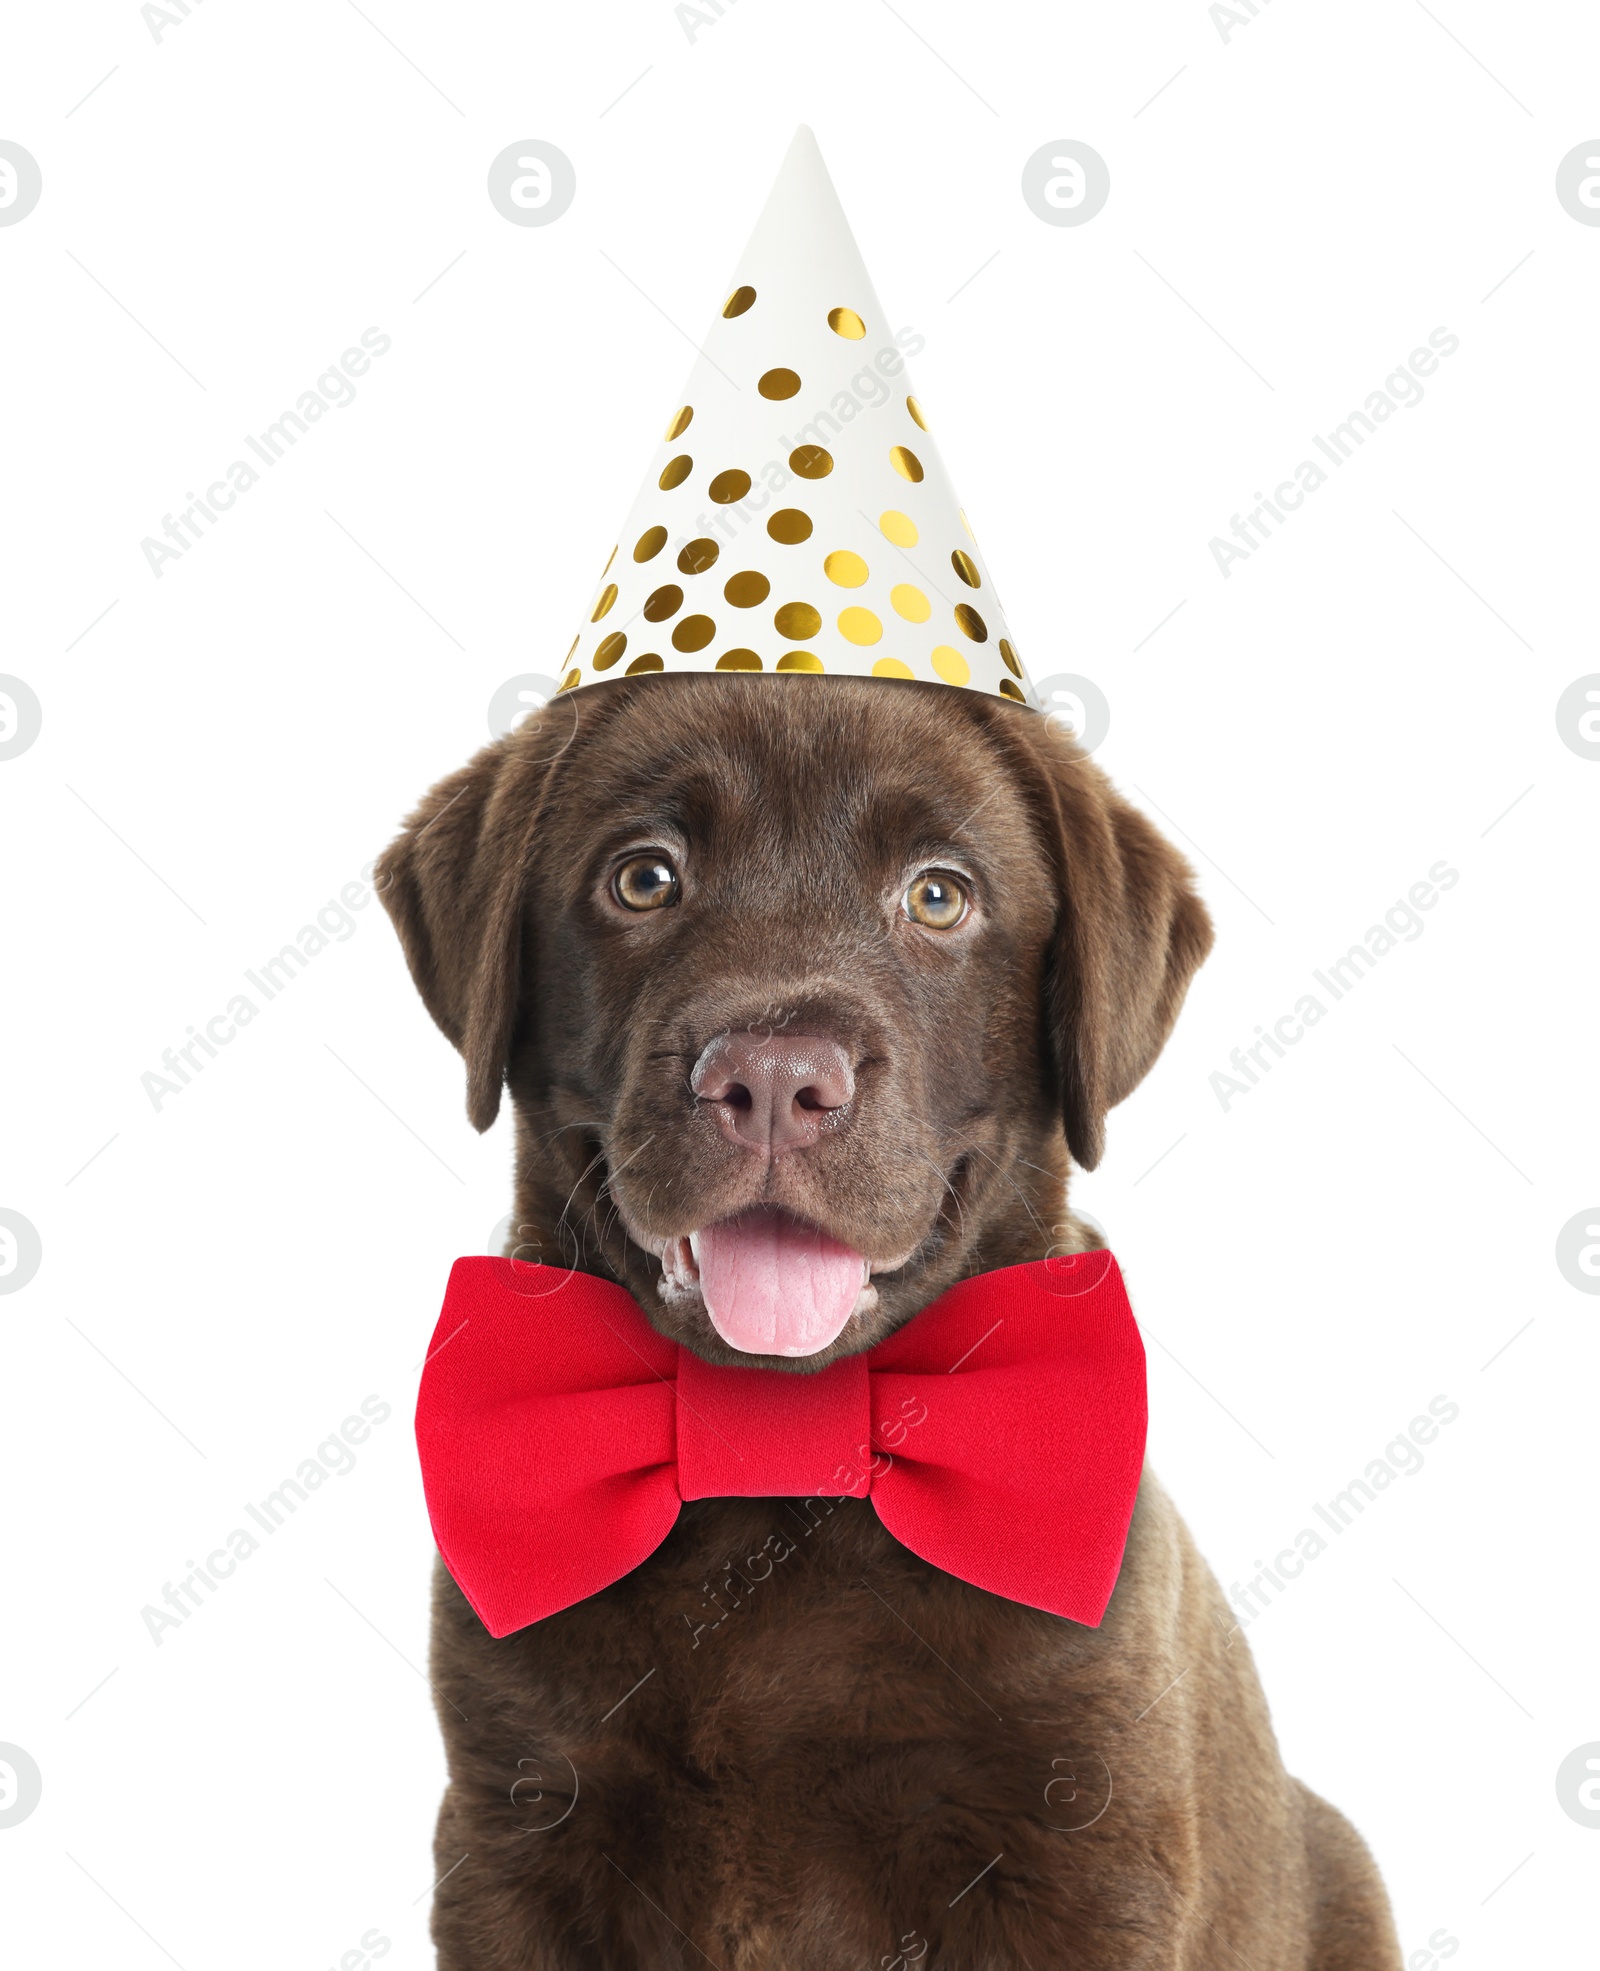 Image of Cute Labrador puppy with party hat and bow tie on white background